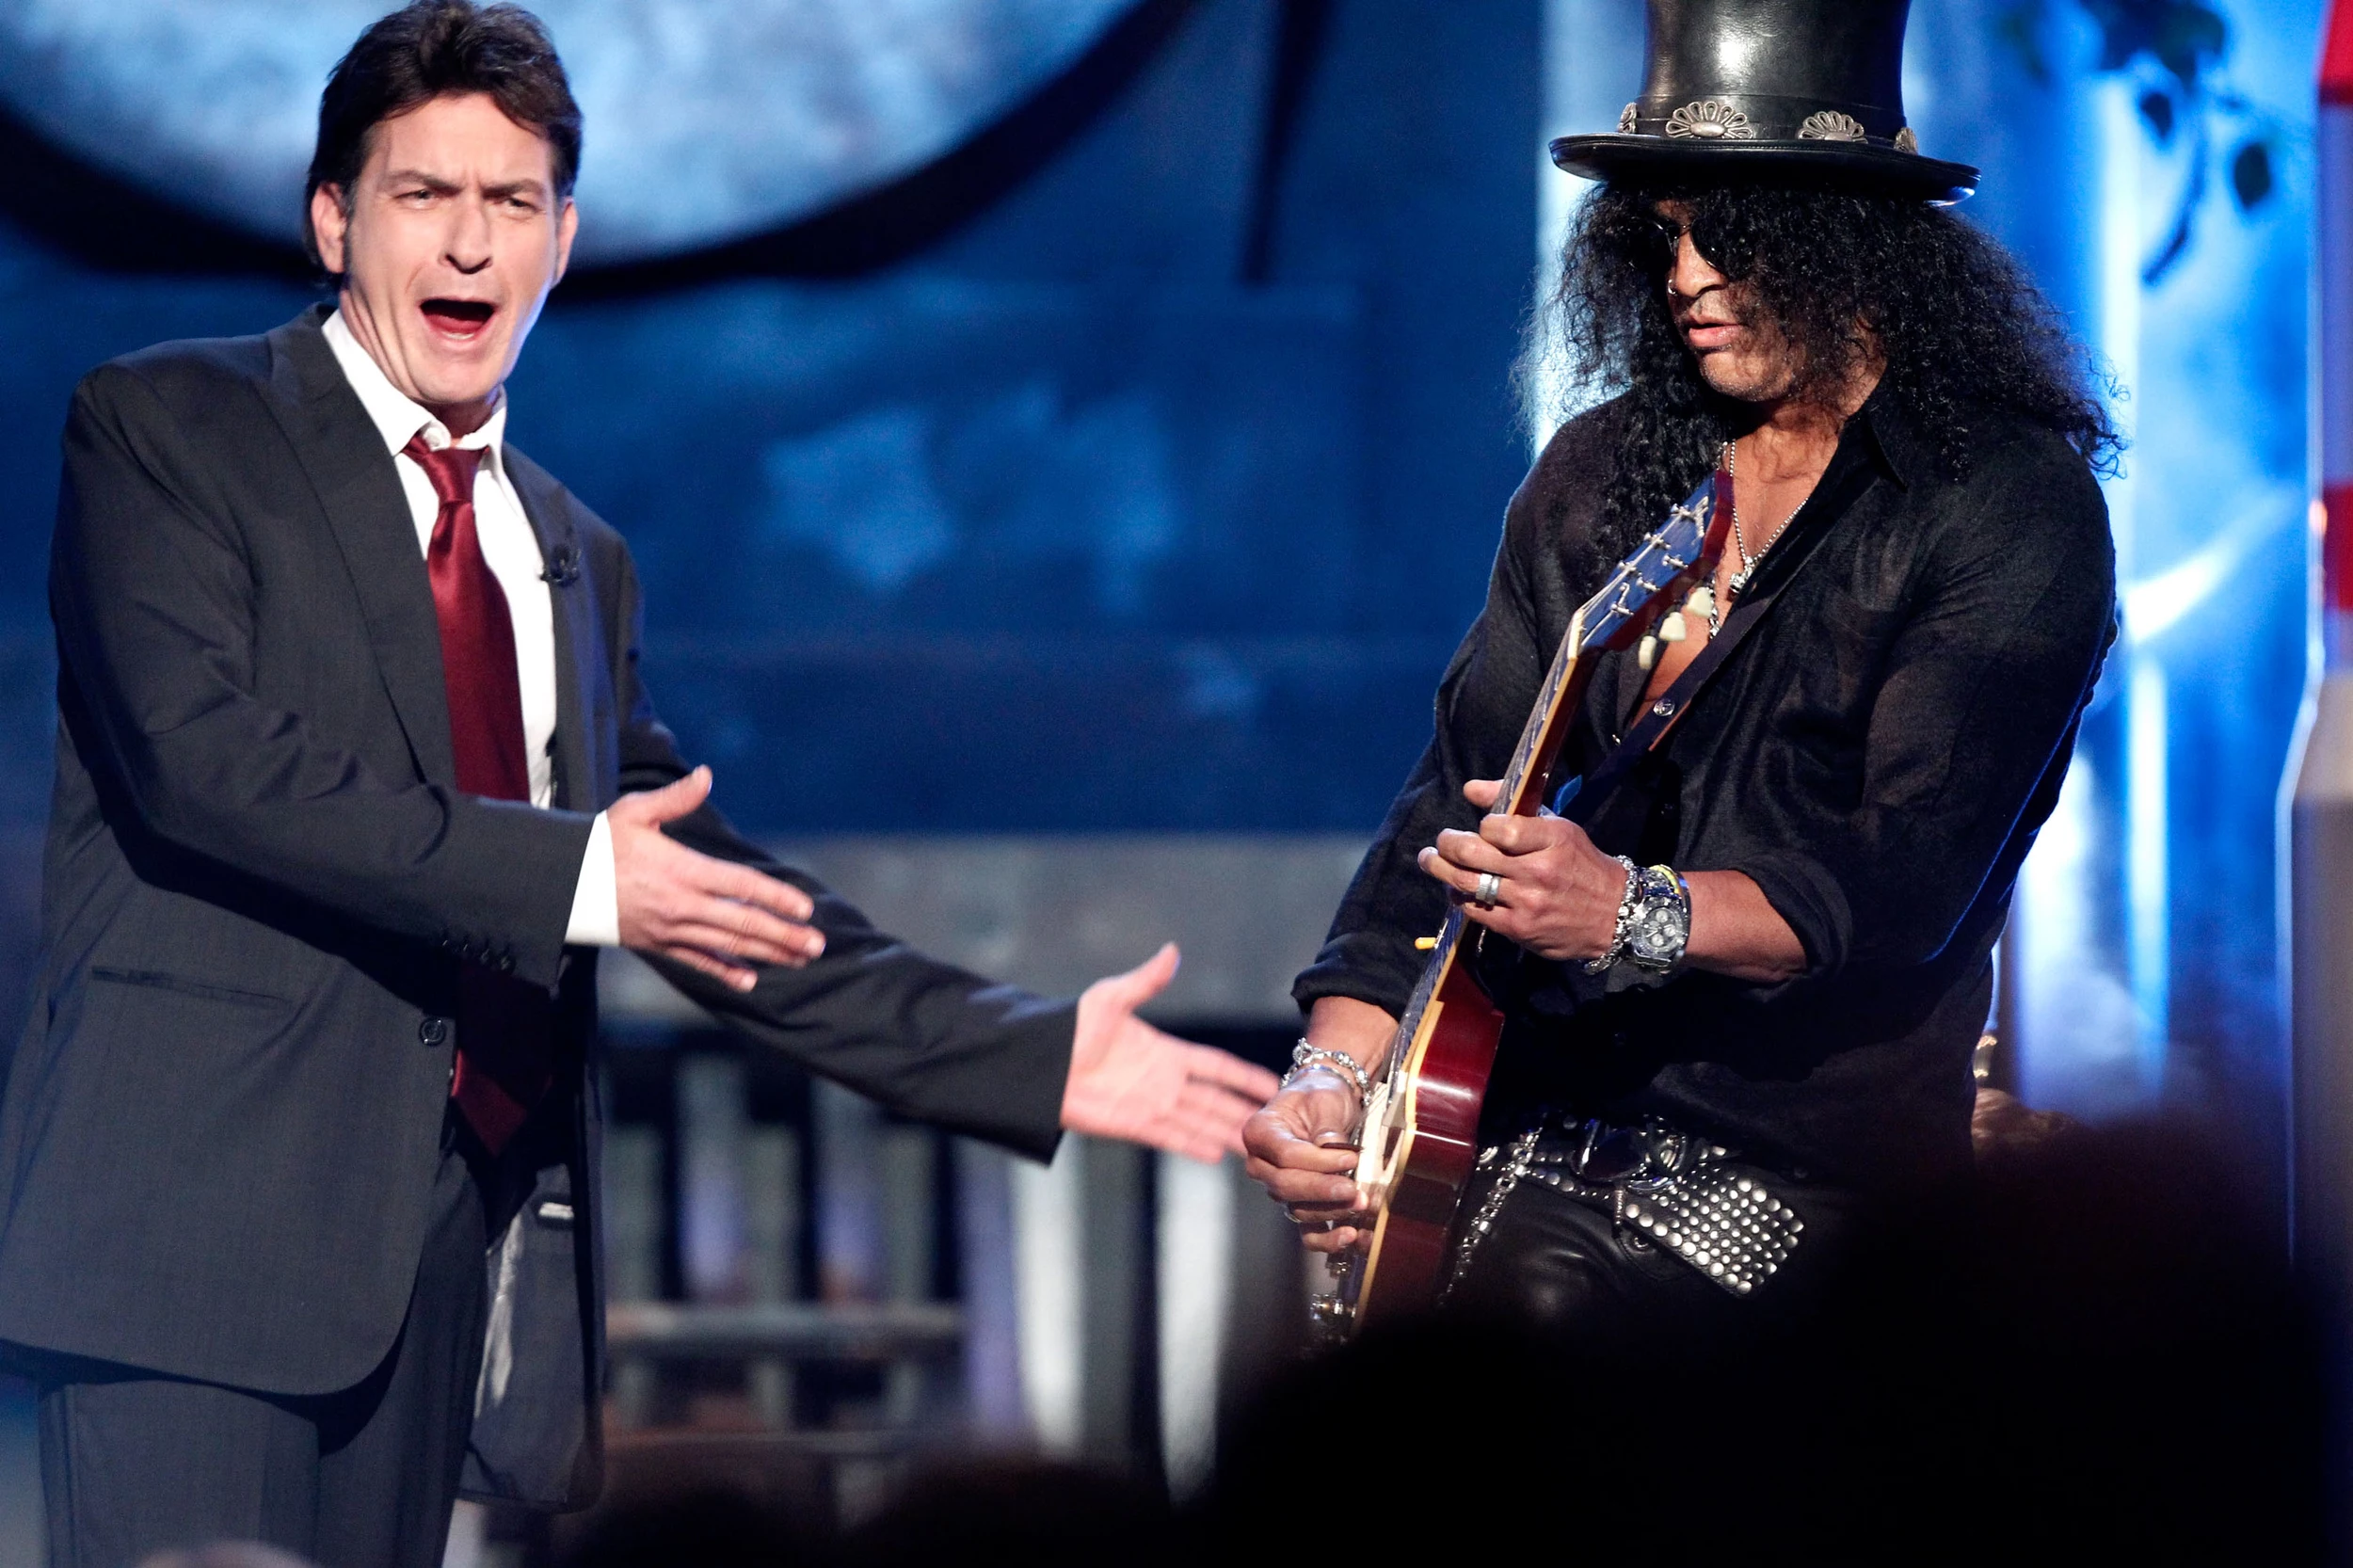 Slash Intros Charlie Sheen At Comedy Central Roast With Guitar Solo [VIDEO]